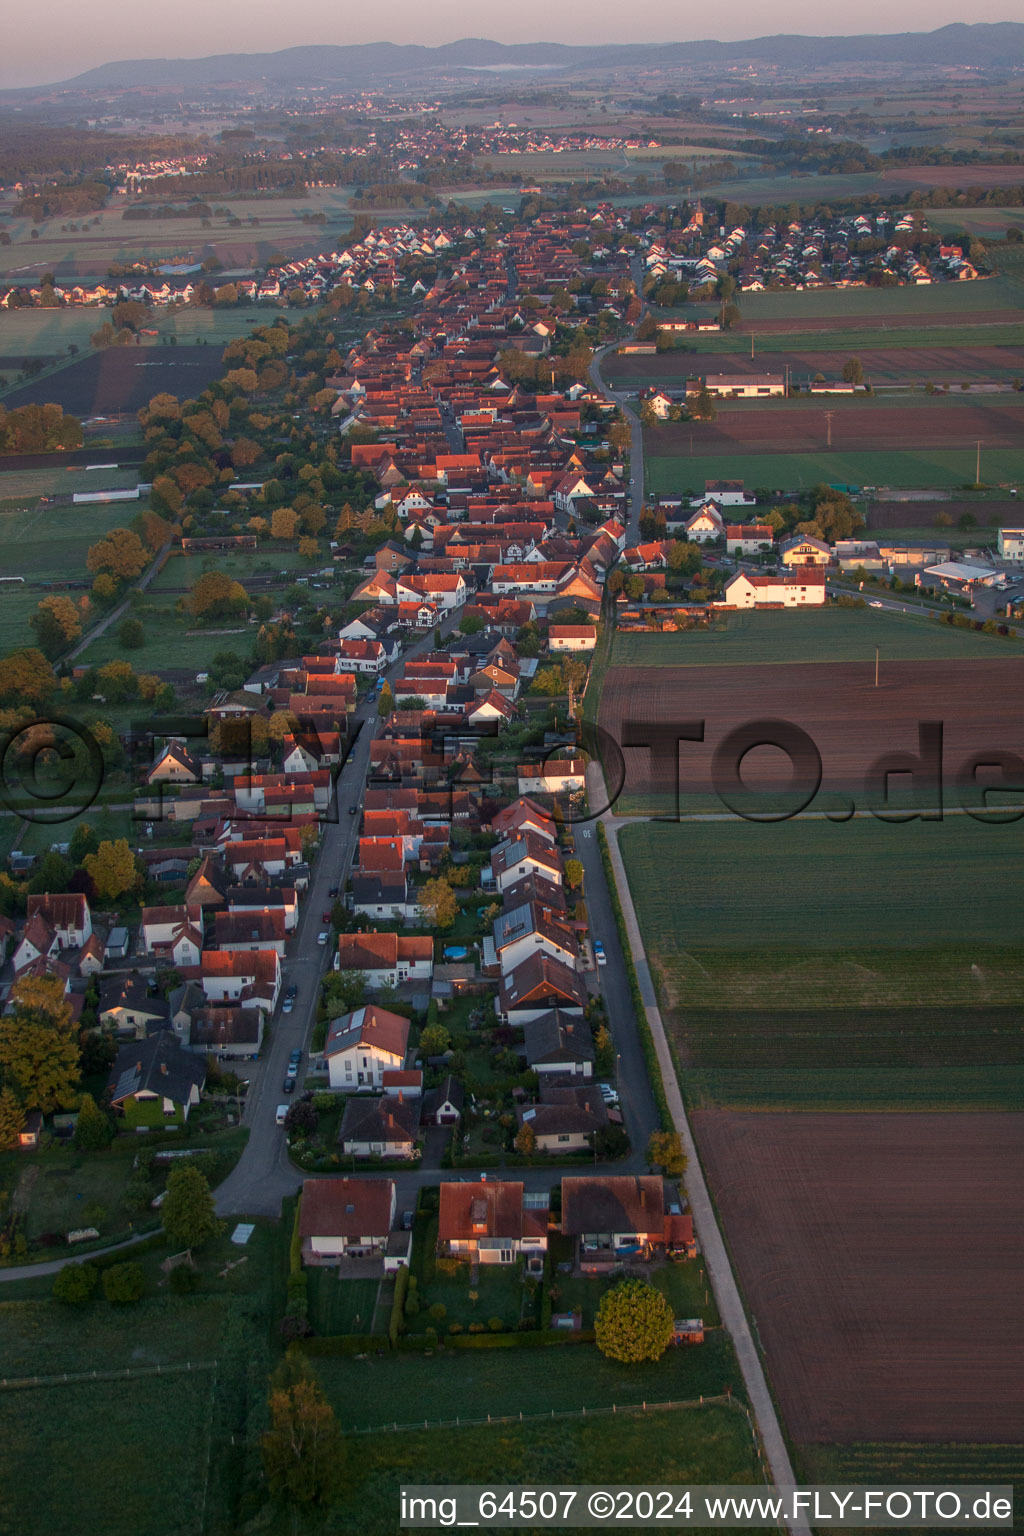 Village - view on the edge of agricultural fields and farmland in Freckenfeld in the state Rhineland-Palatinate, Germany from above